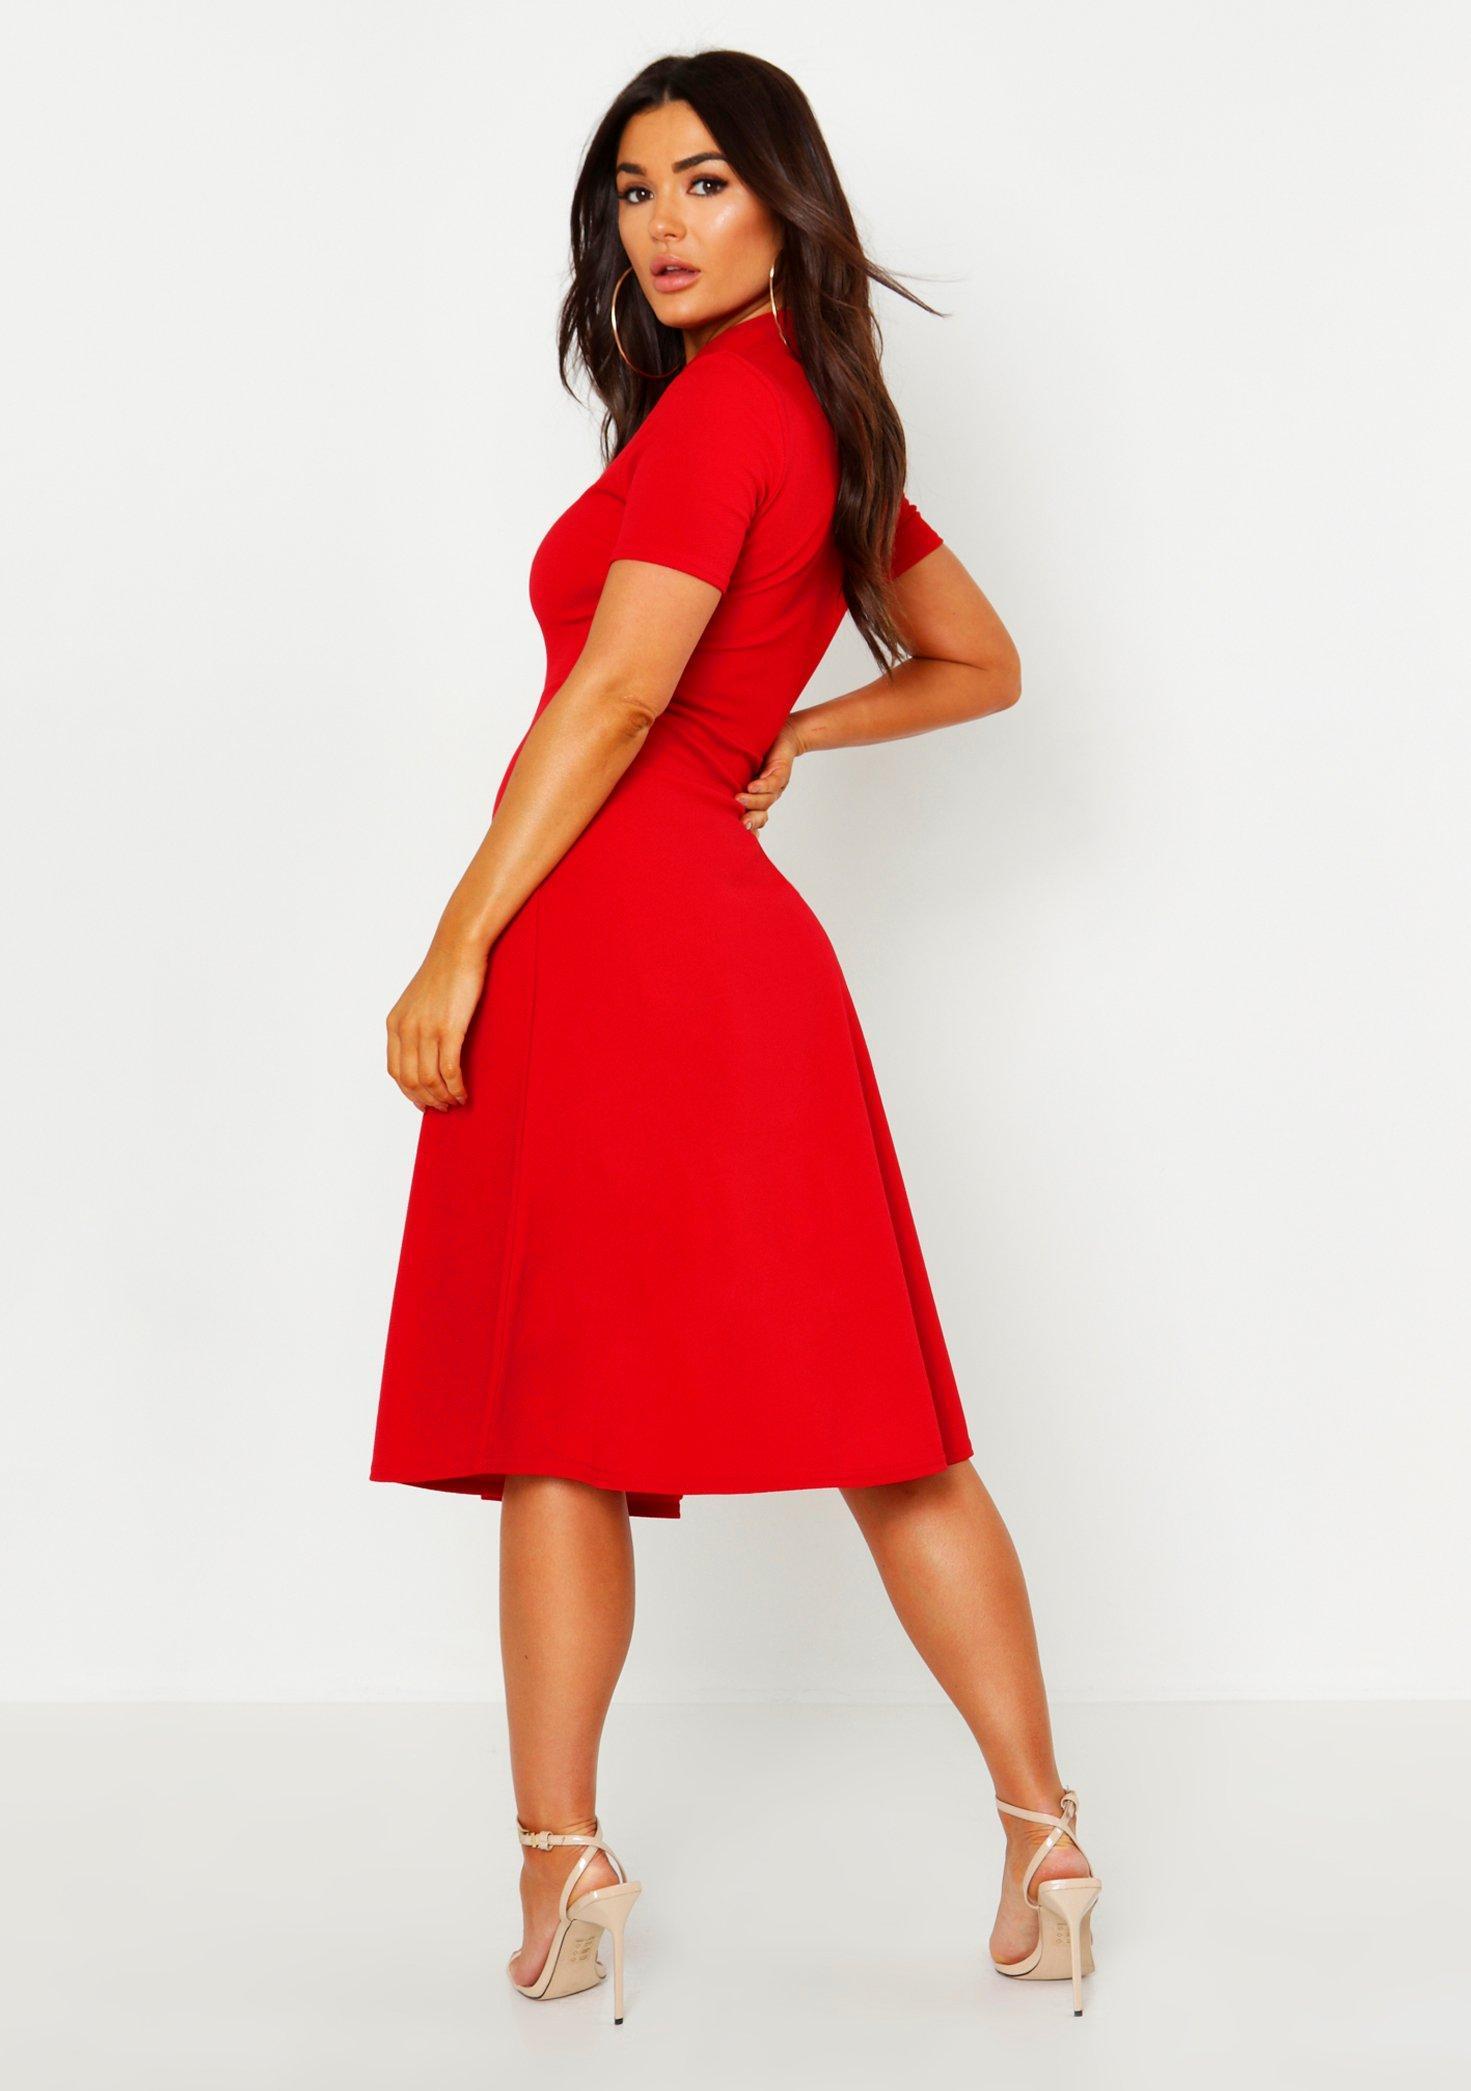 Boohoo Womens High Neck Button Detail Skater Dress in Red - Lyst